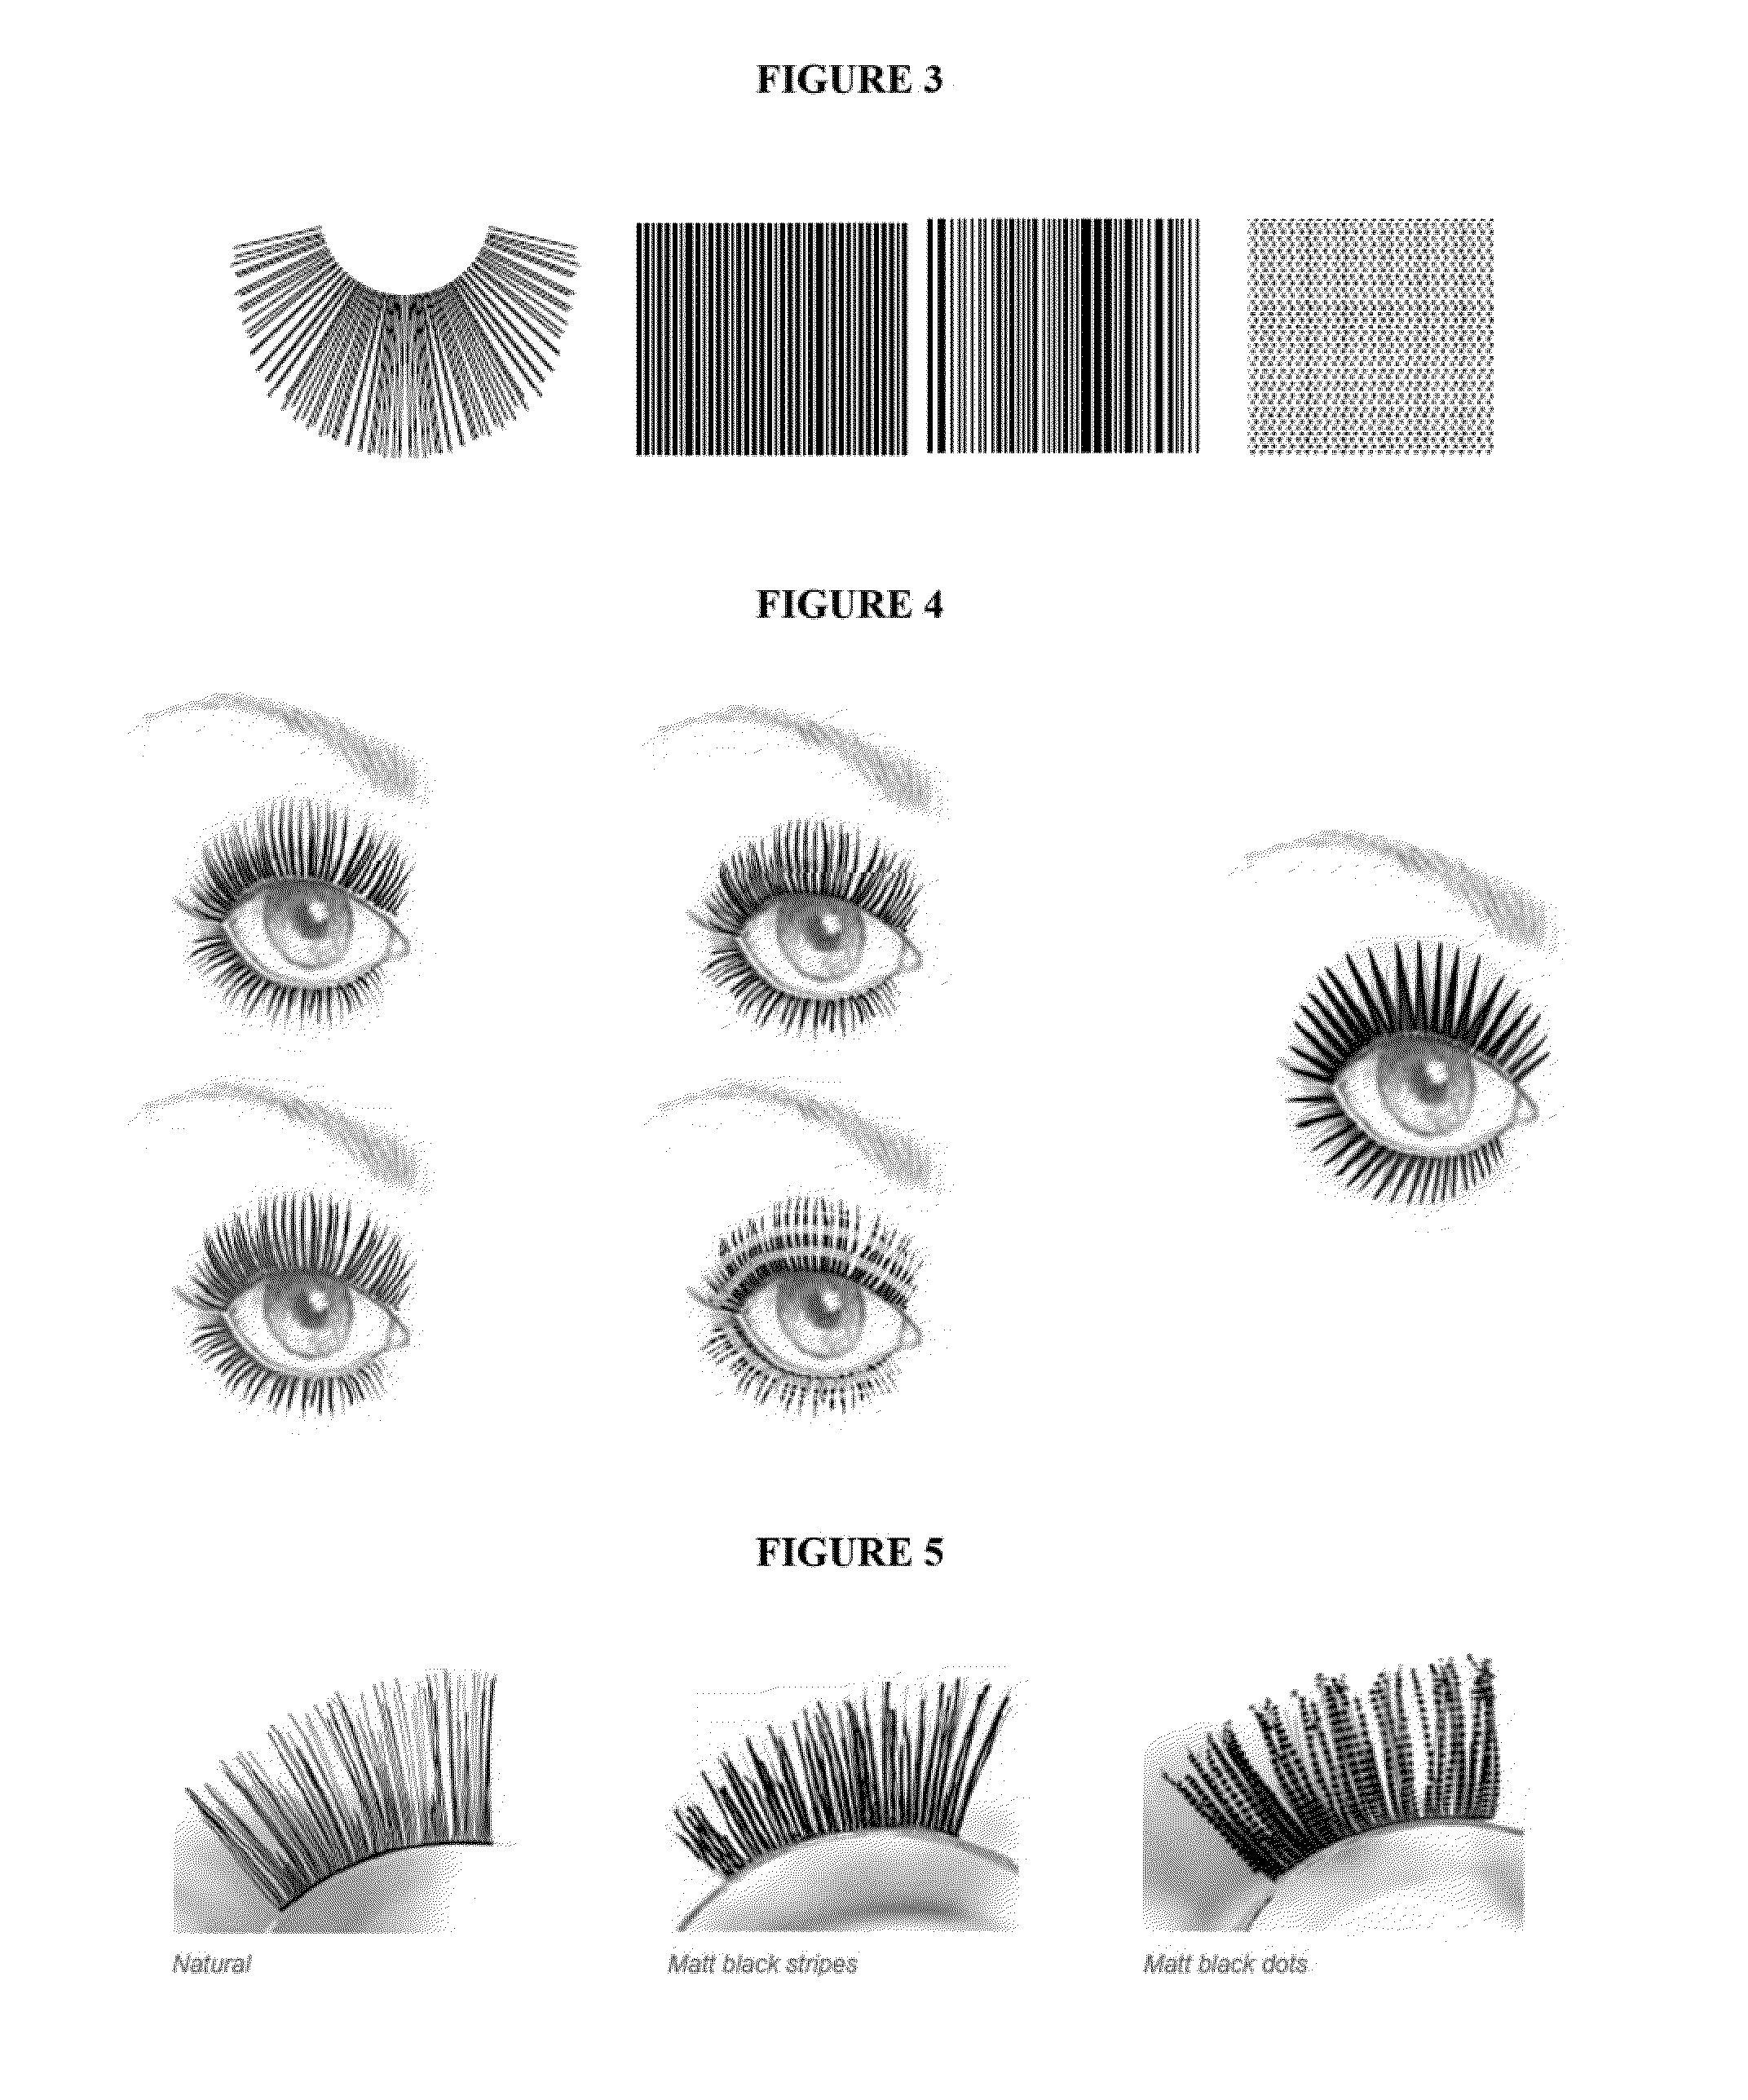 Composition and Method for Dry Application of Mascara